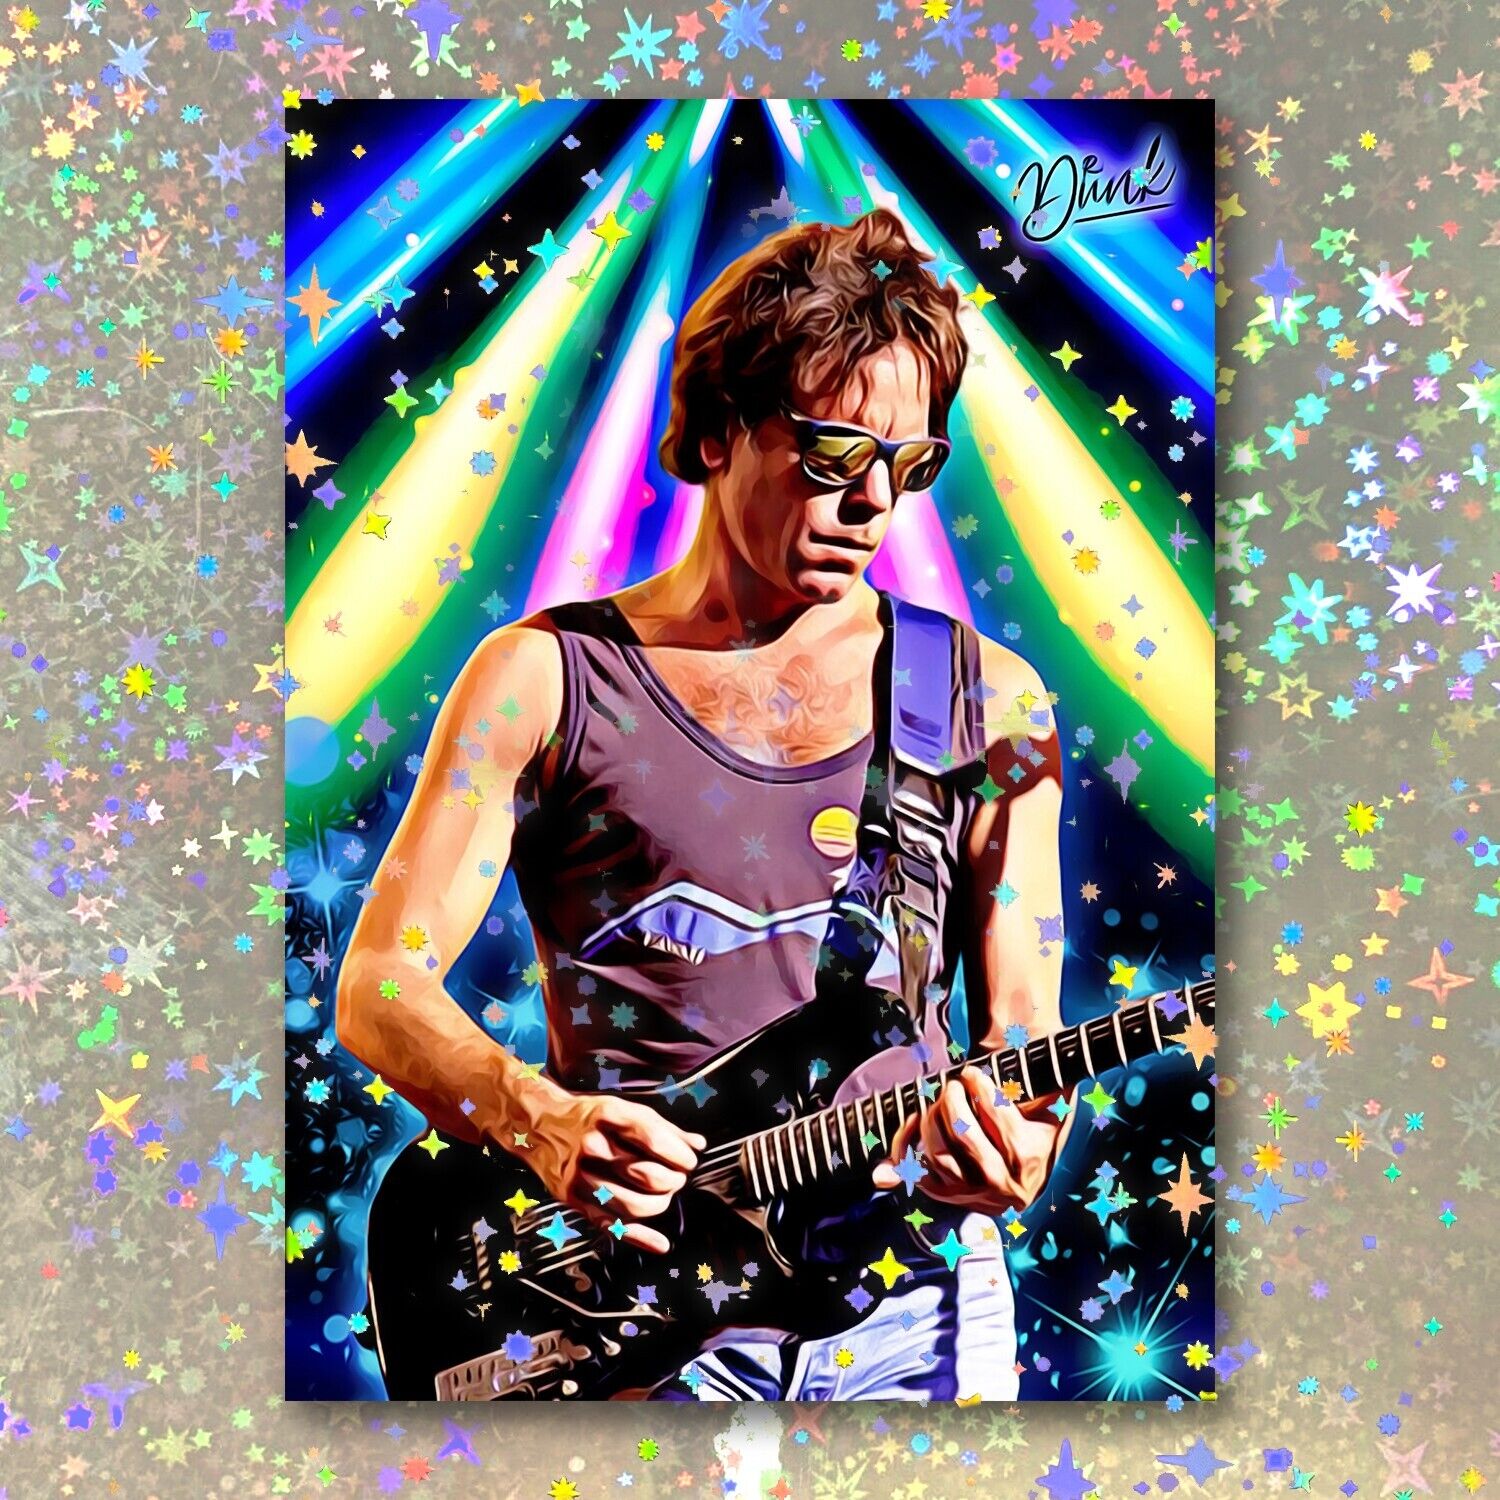 Bob Weir Holographic VIP Headliner Sketch Card Limited 1/5 Dr. Dunk Signed